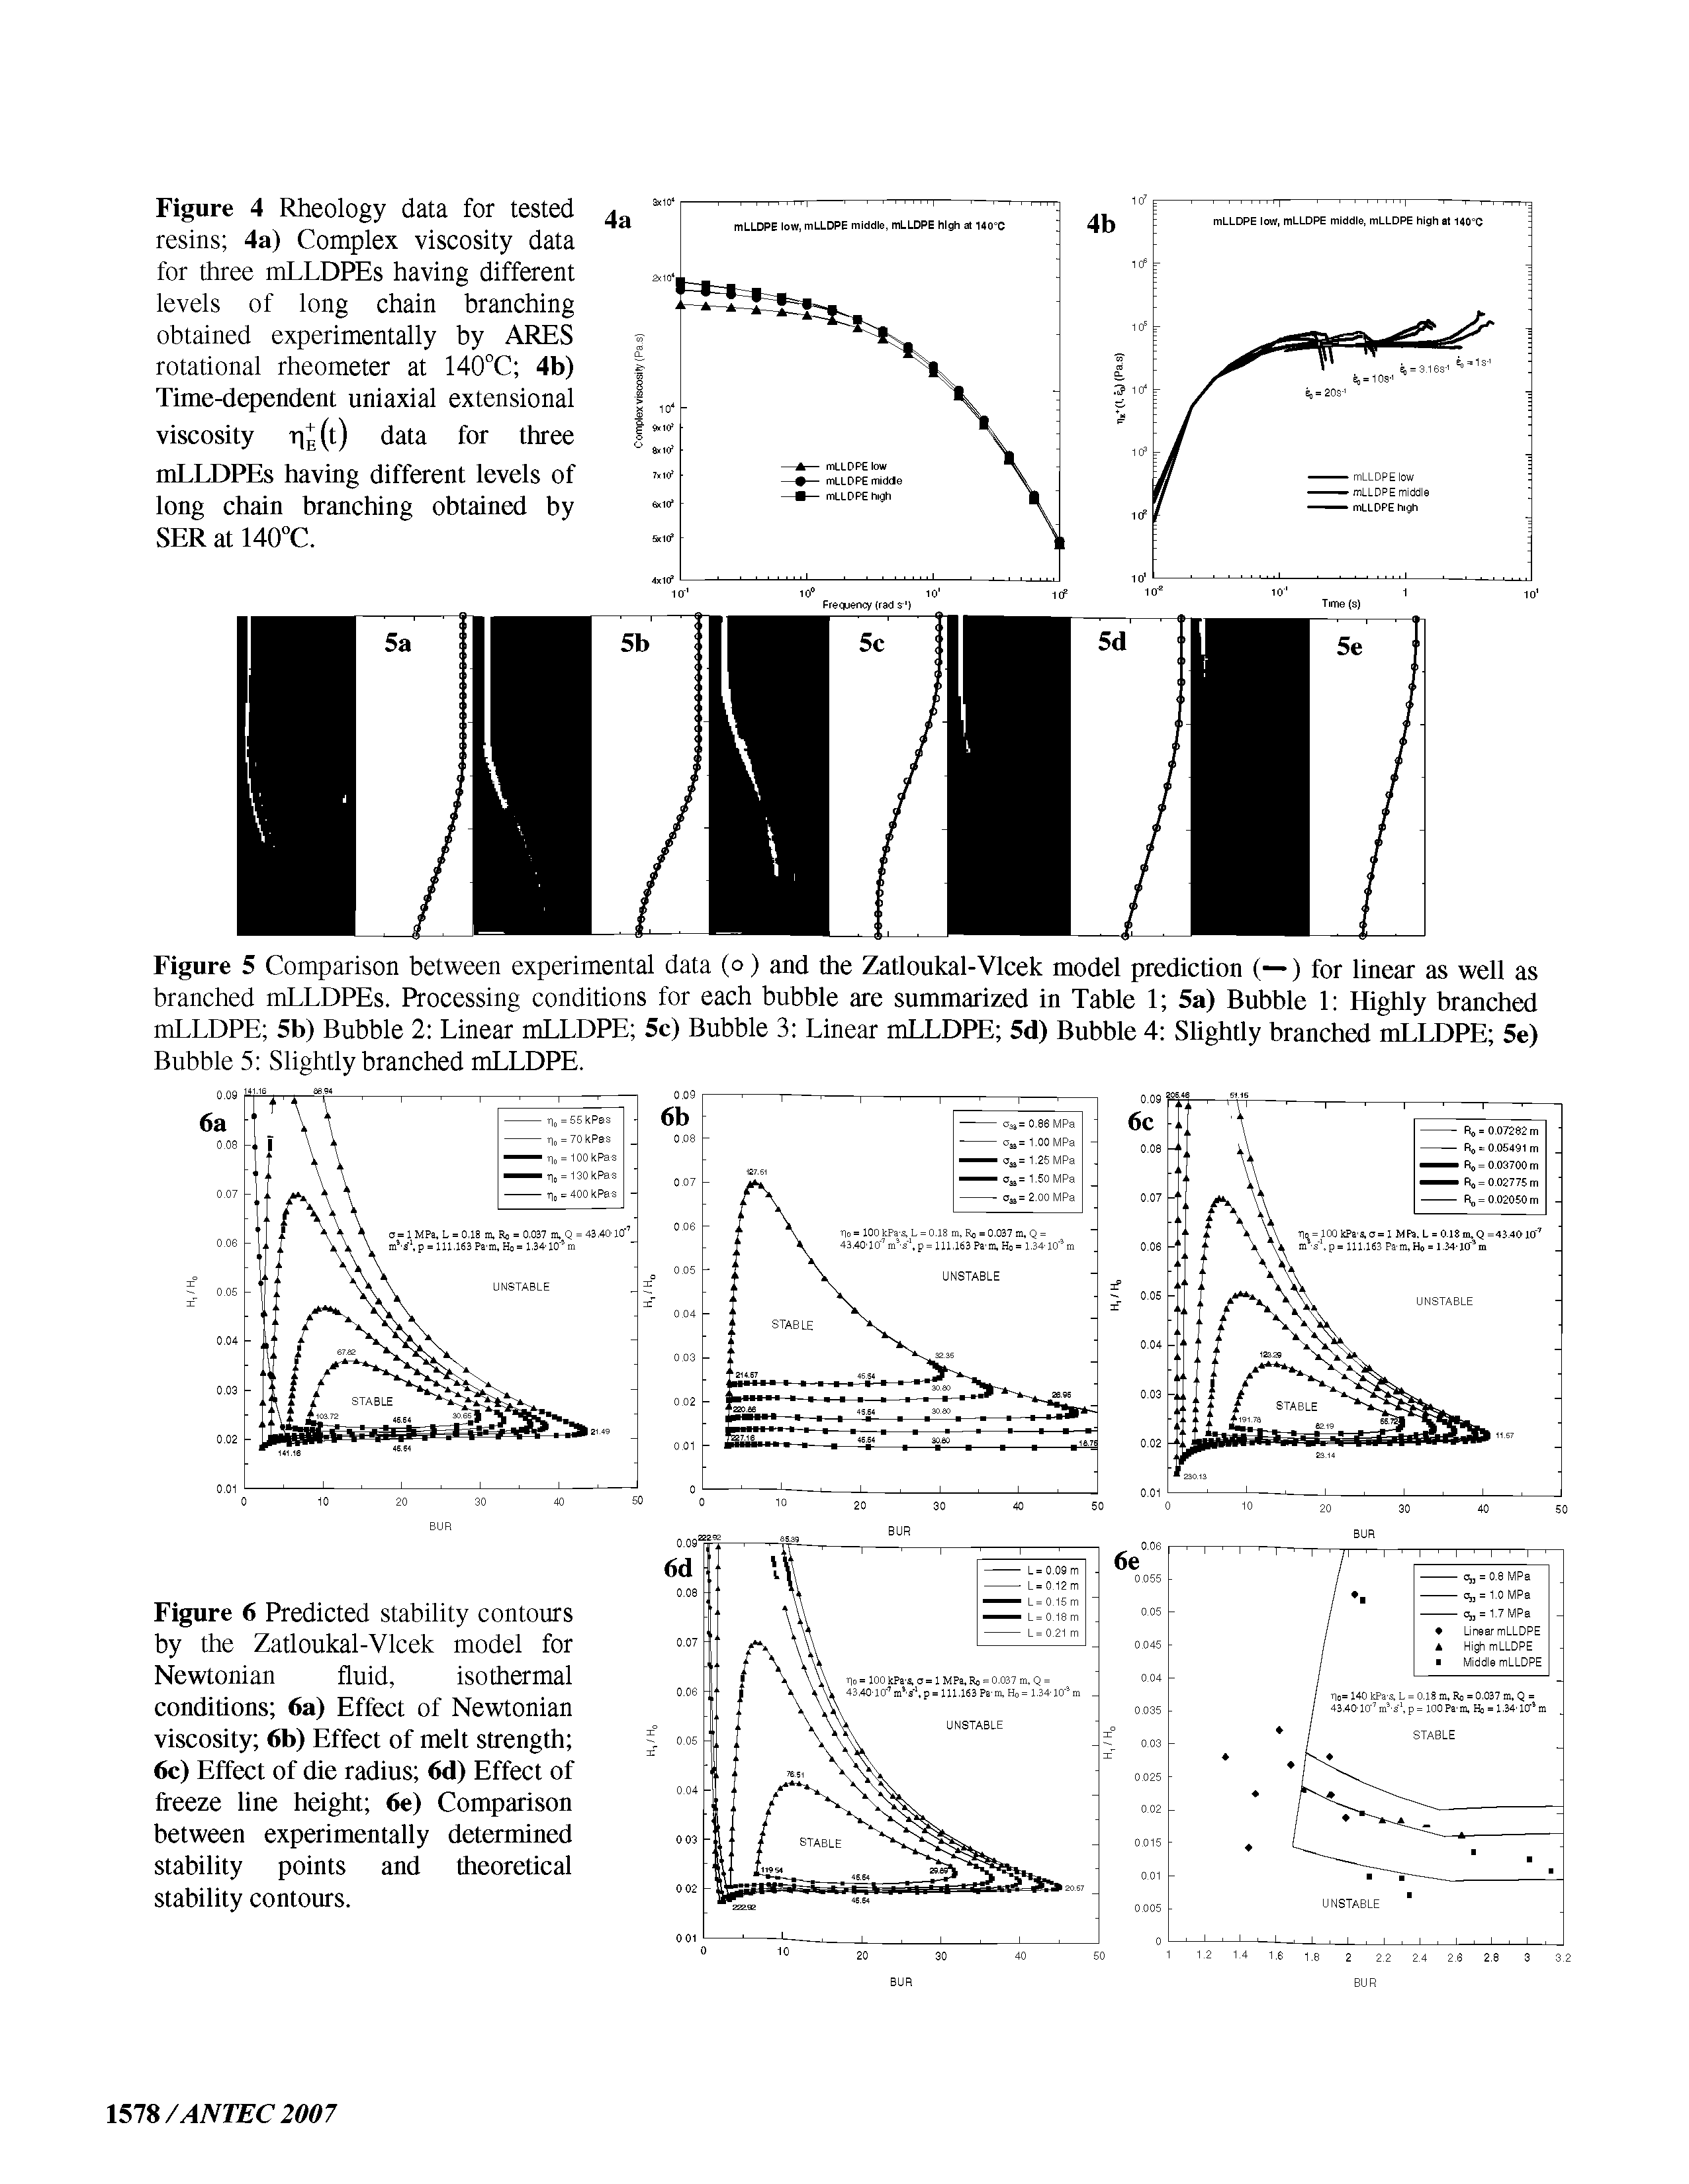 Figure 6 Predicted stability contours by the Zatloukal-Vlcek model for Newtonian fluid, isothermal conditions 6a) Effect of Newtonian viscosity 6b) Effect of melt strength 6c) Effect of die radius 6d) Effect of freeze line height 6e) Comparison between experimentally determined stability points and theoretical stability contours.